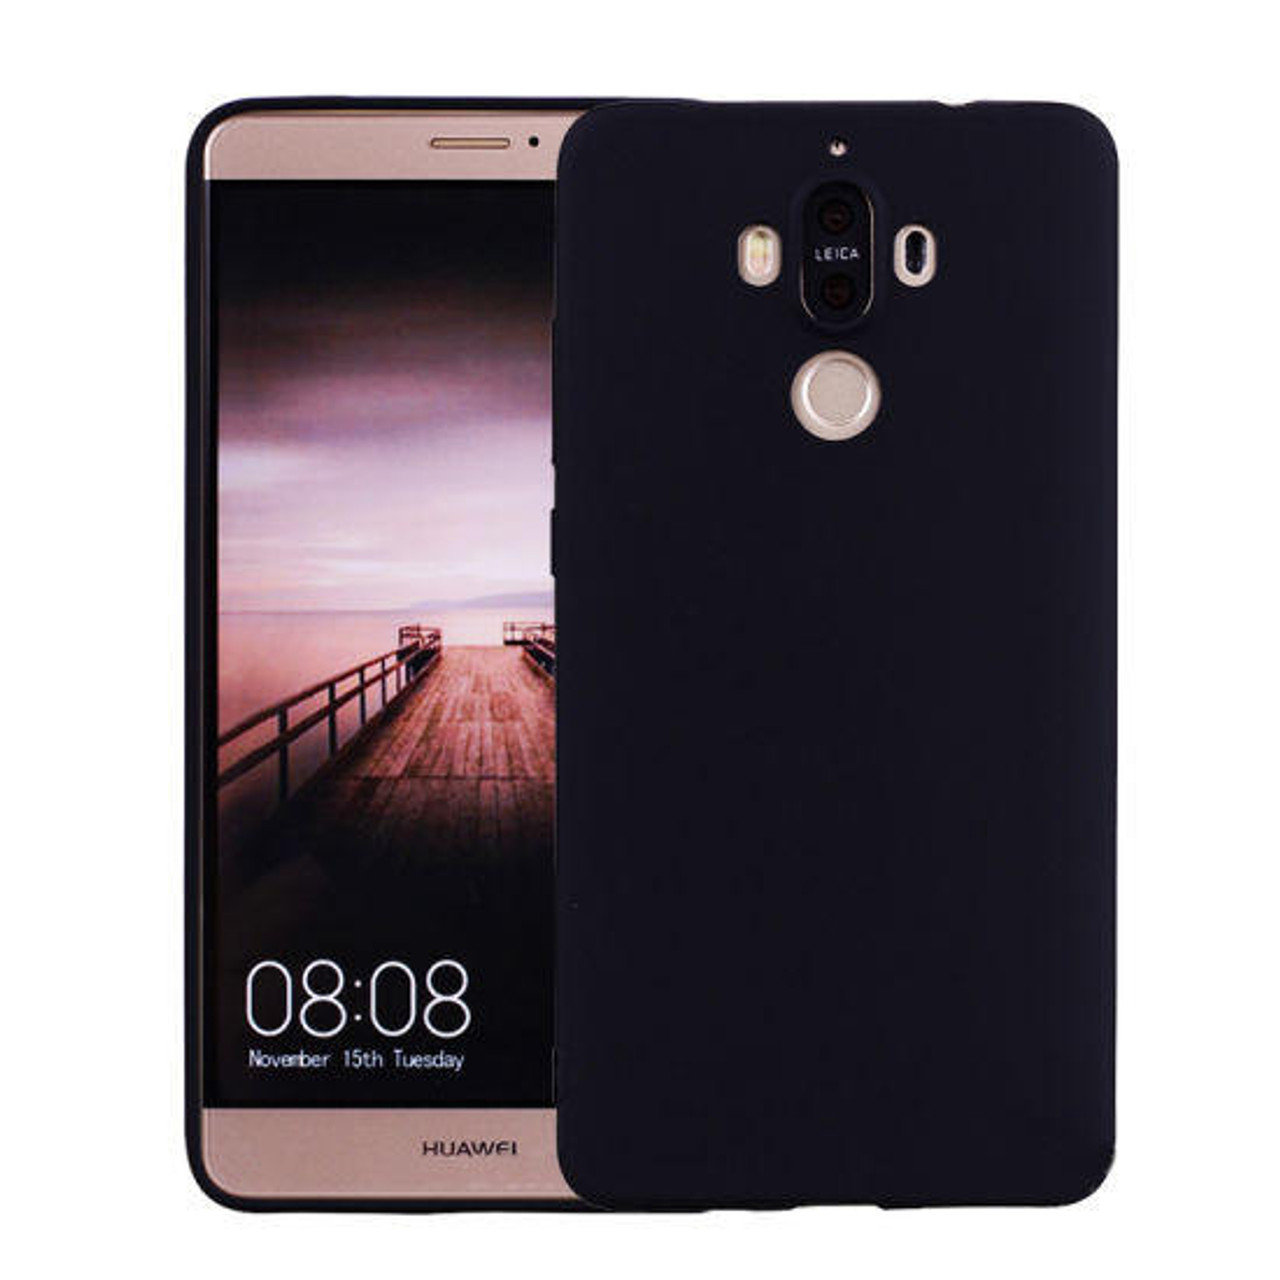 gans Reactor Gezond eten Huawei Mate 9 Silicone Case - Parallel Imported